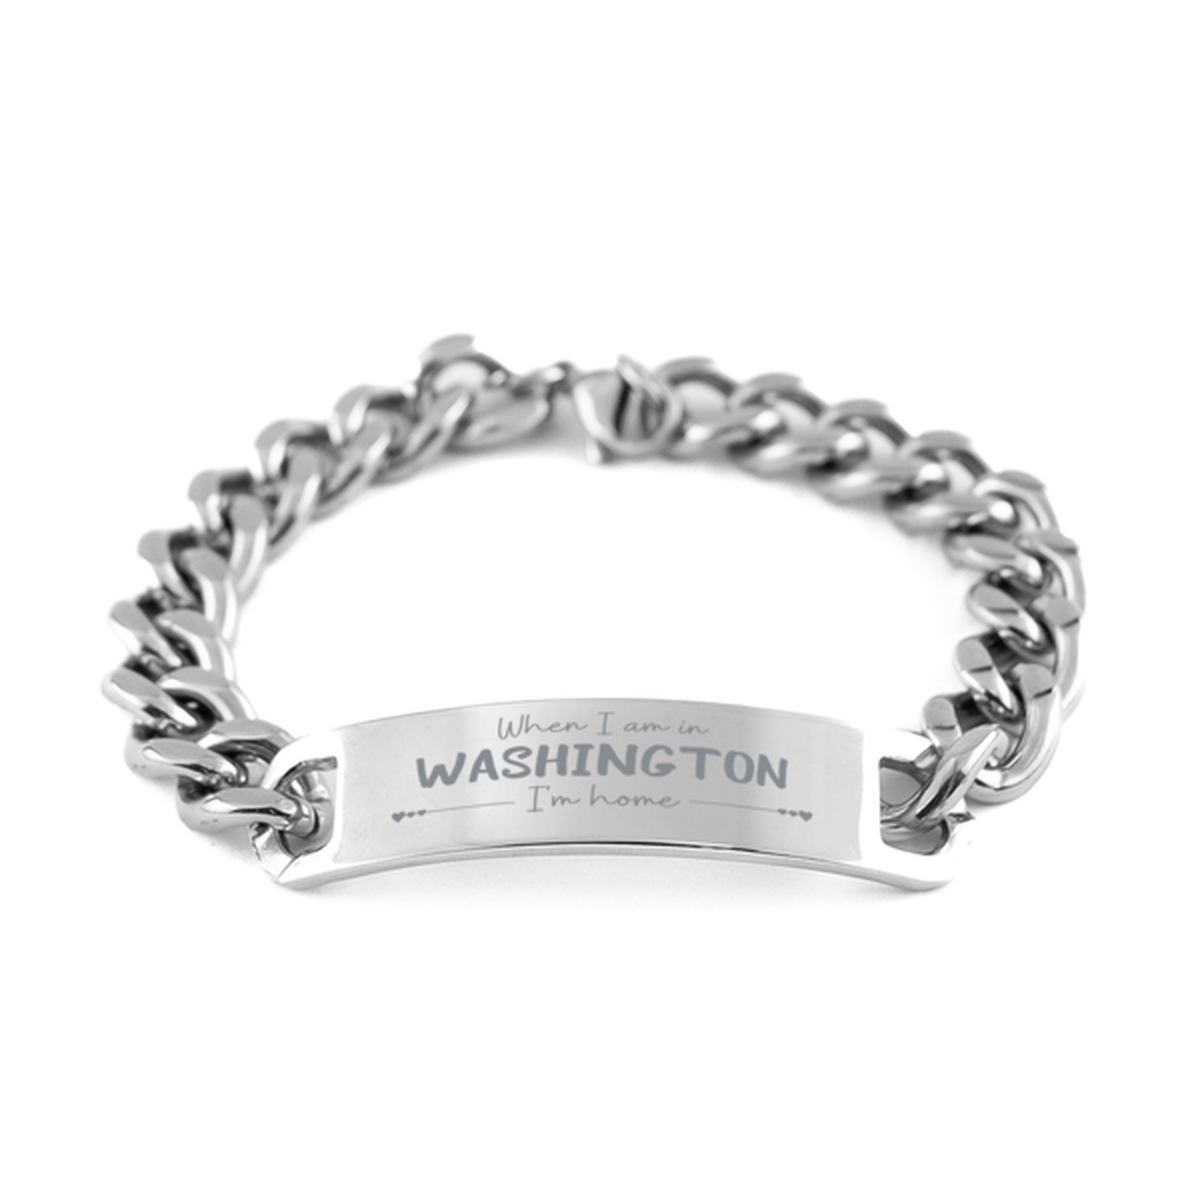 When I am in Washington I'm home Cuban Chain Stainless Steel Bracelet, Cheap Gifts For Washington, State Washington Birthday Gifts for Friends Coworker